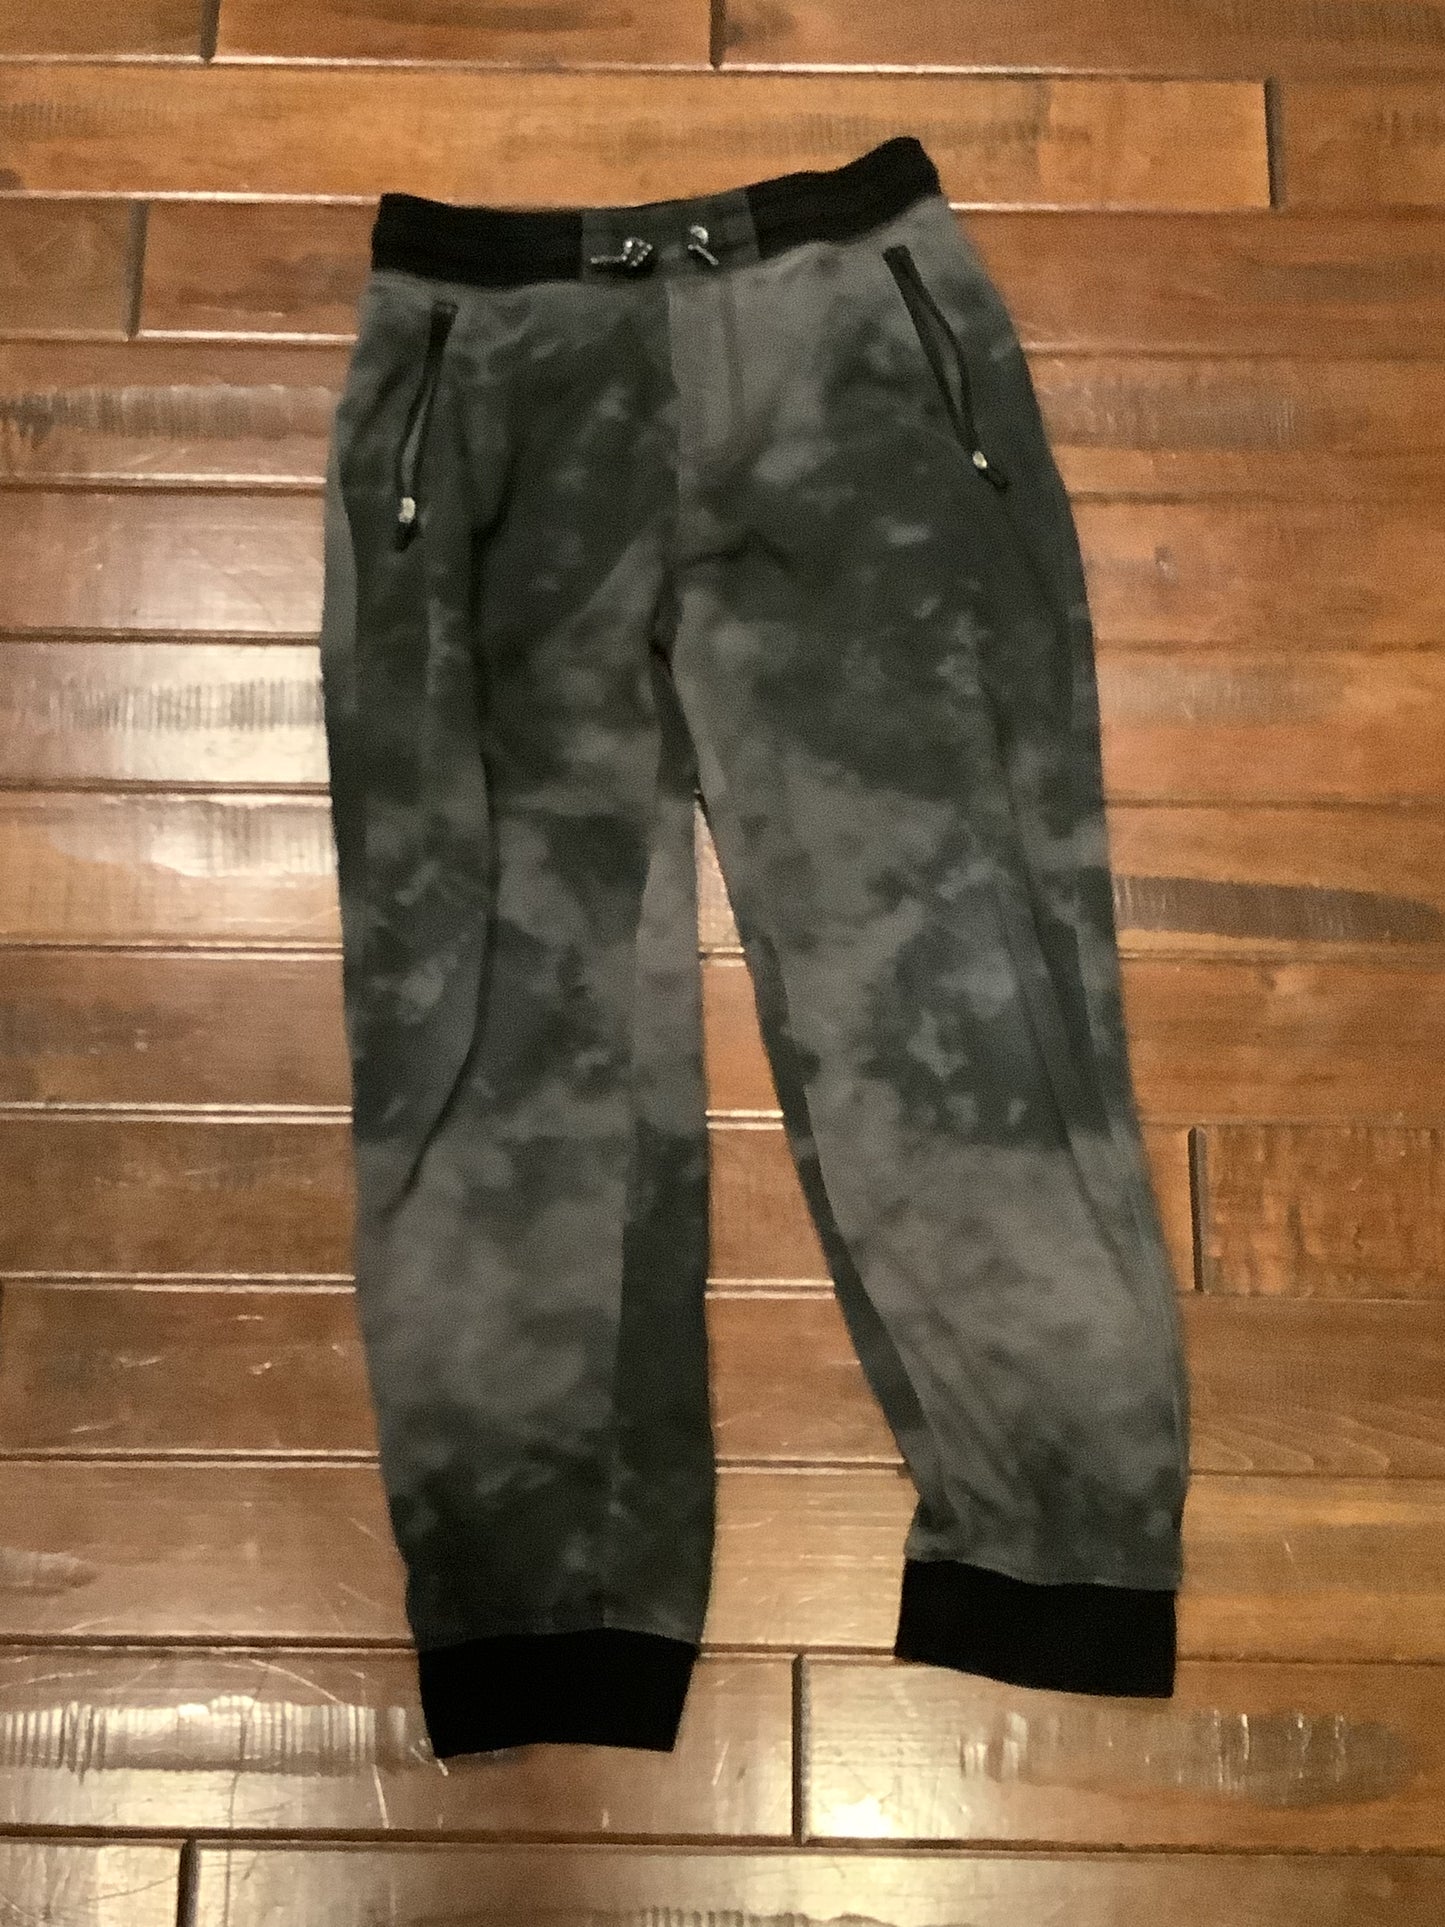 Old Navy black/gray Boys youth large sweatpants-Pickup in Lebanon or Blue Ash